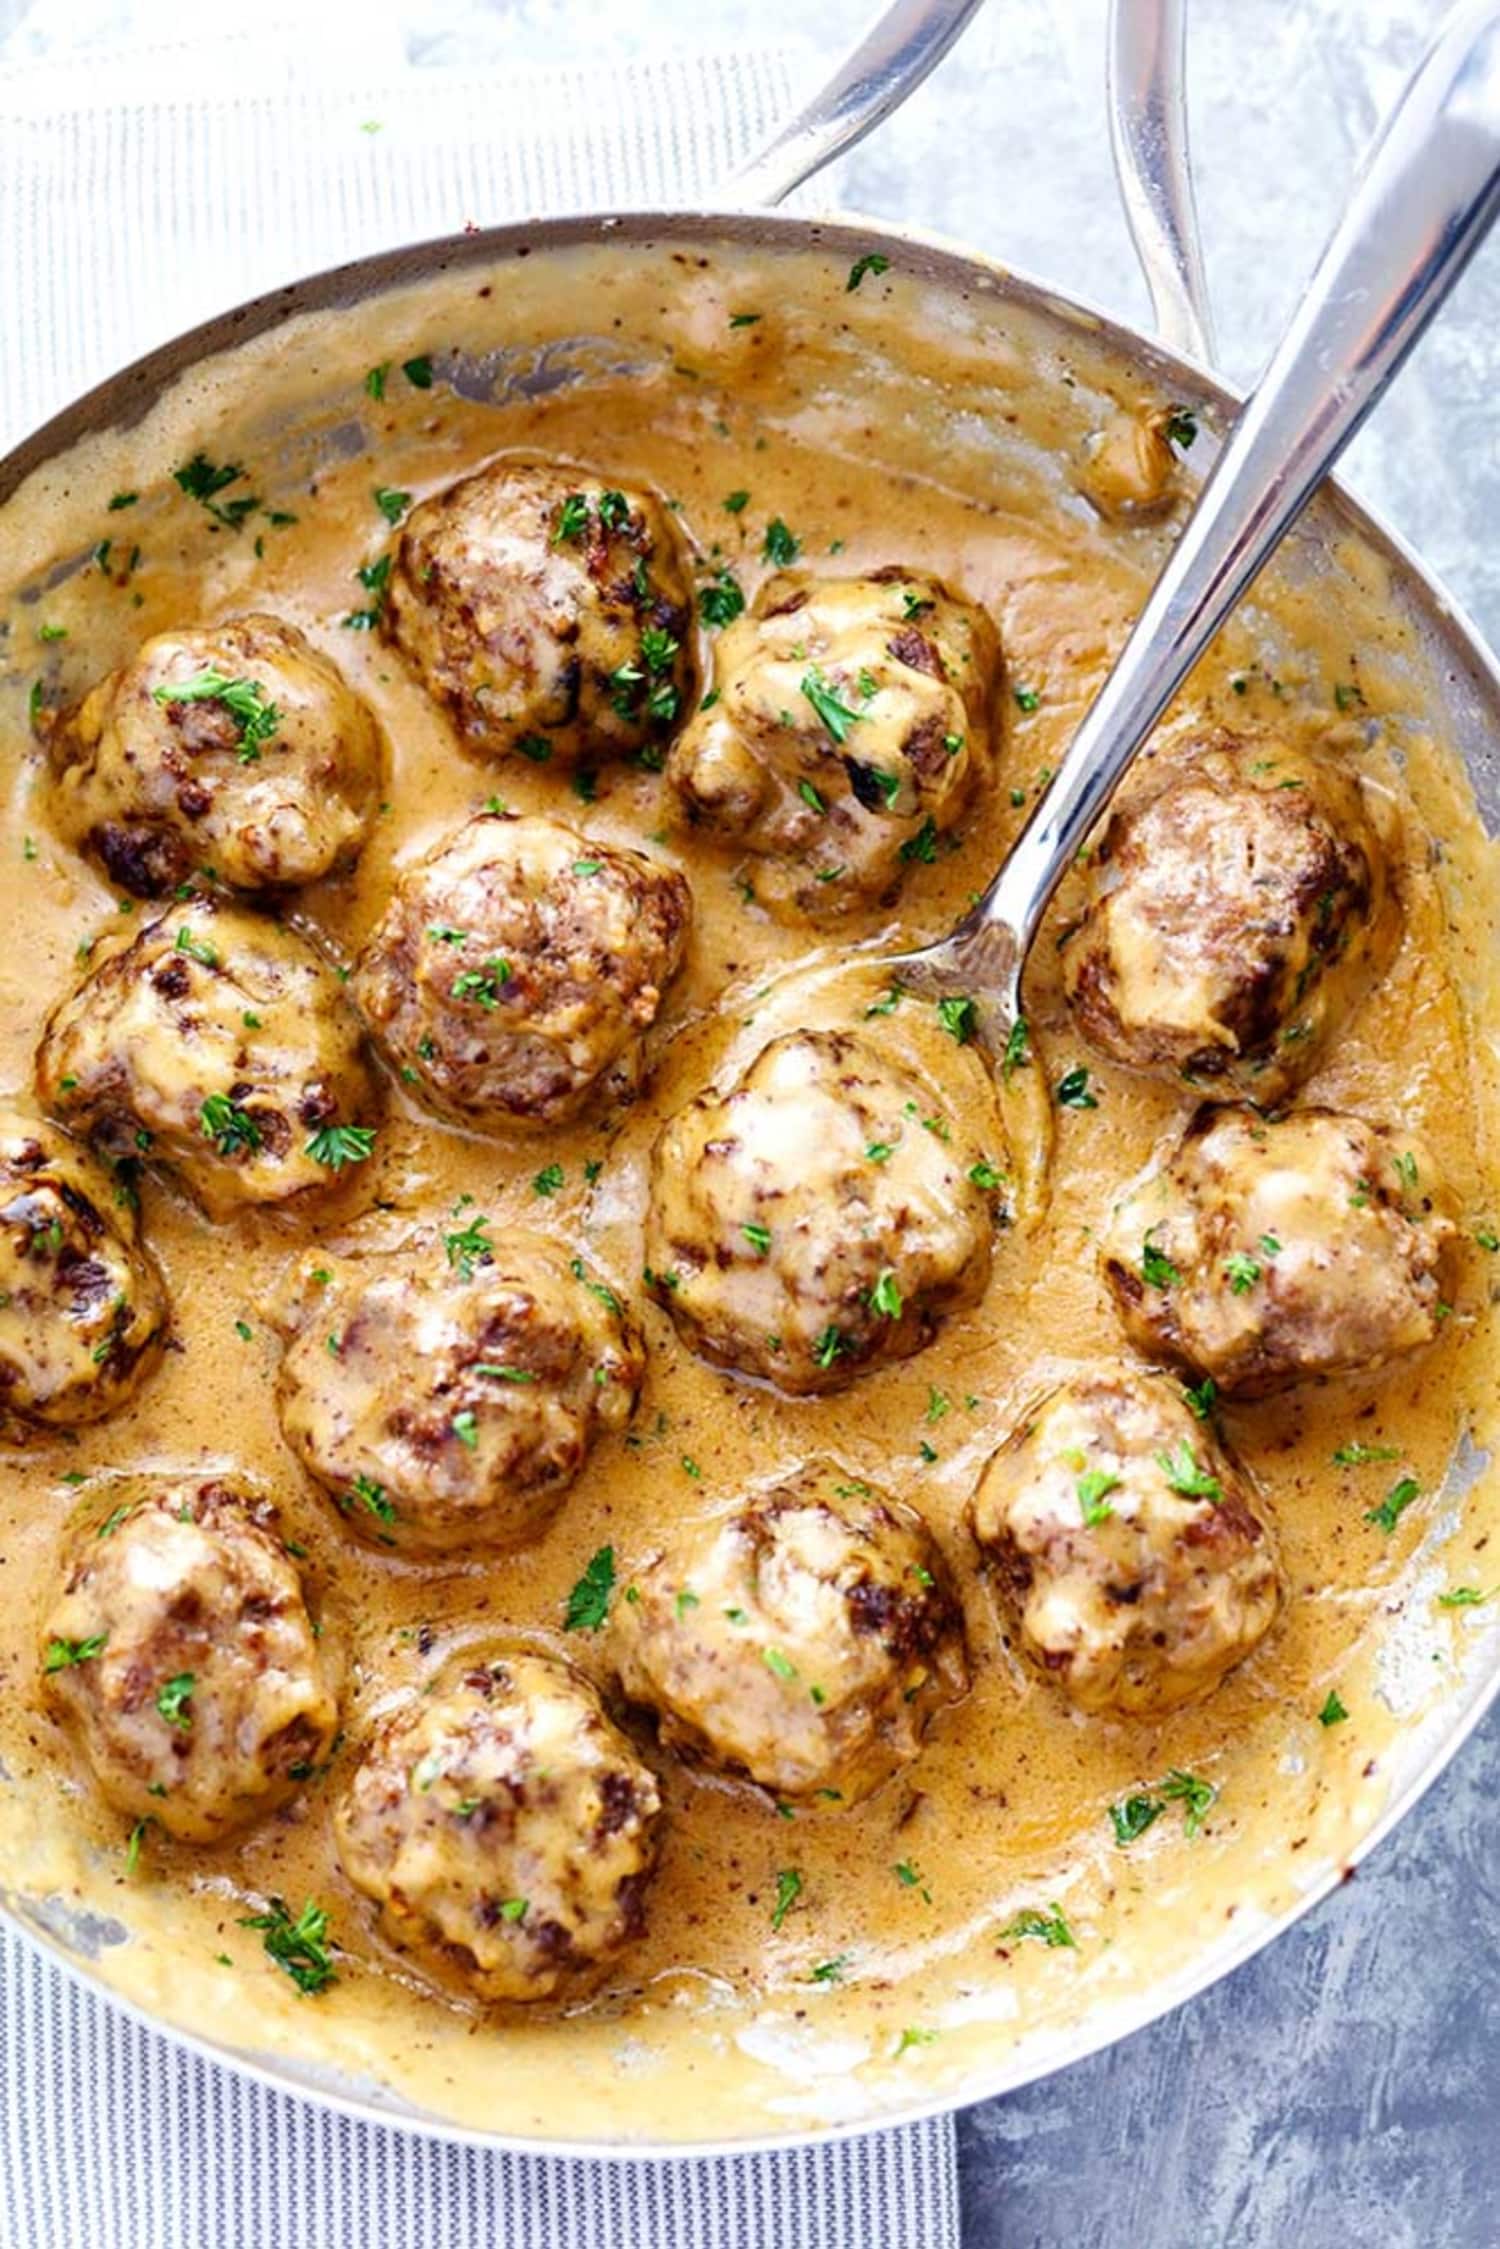 You Don’t Have to Go to IKEA for the Best Swedish Meatballs | Kitchn